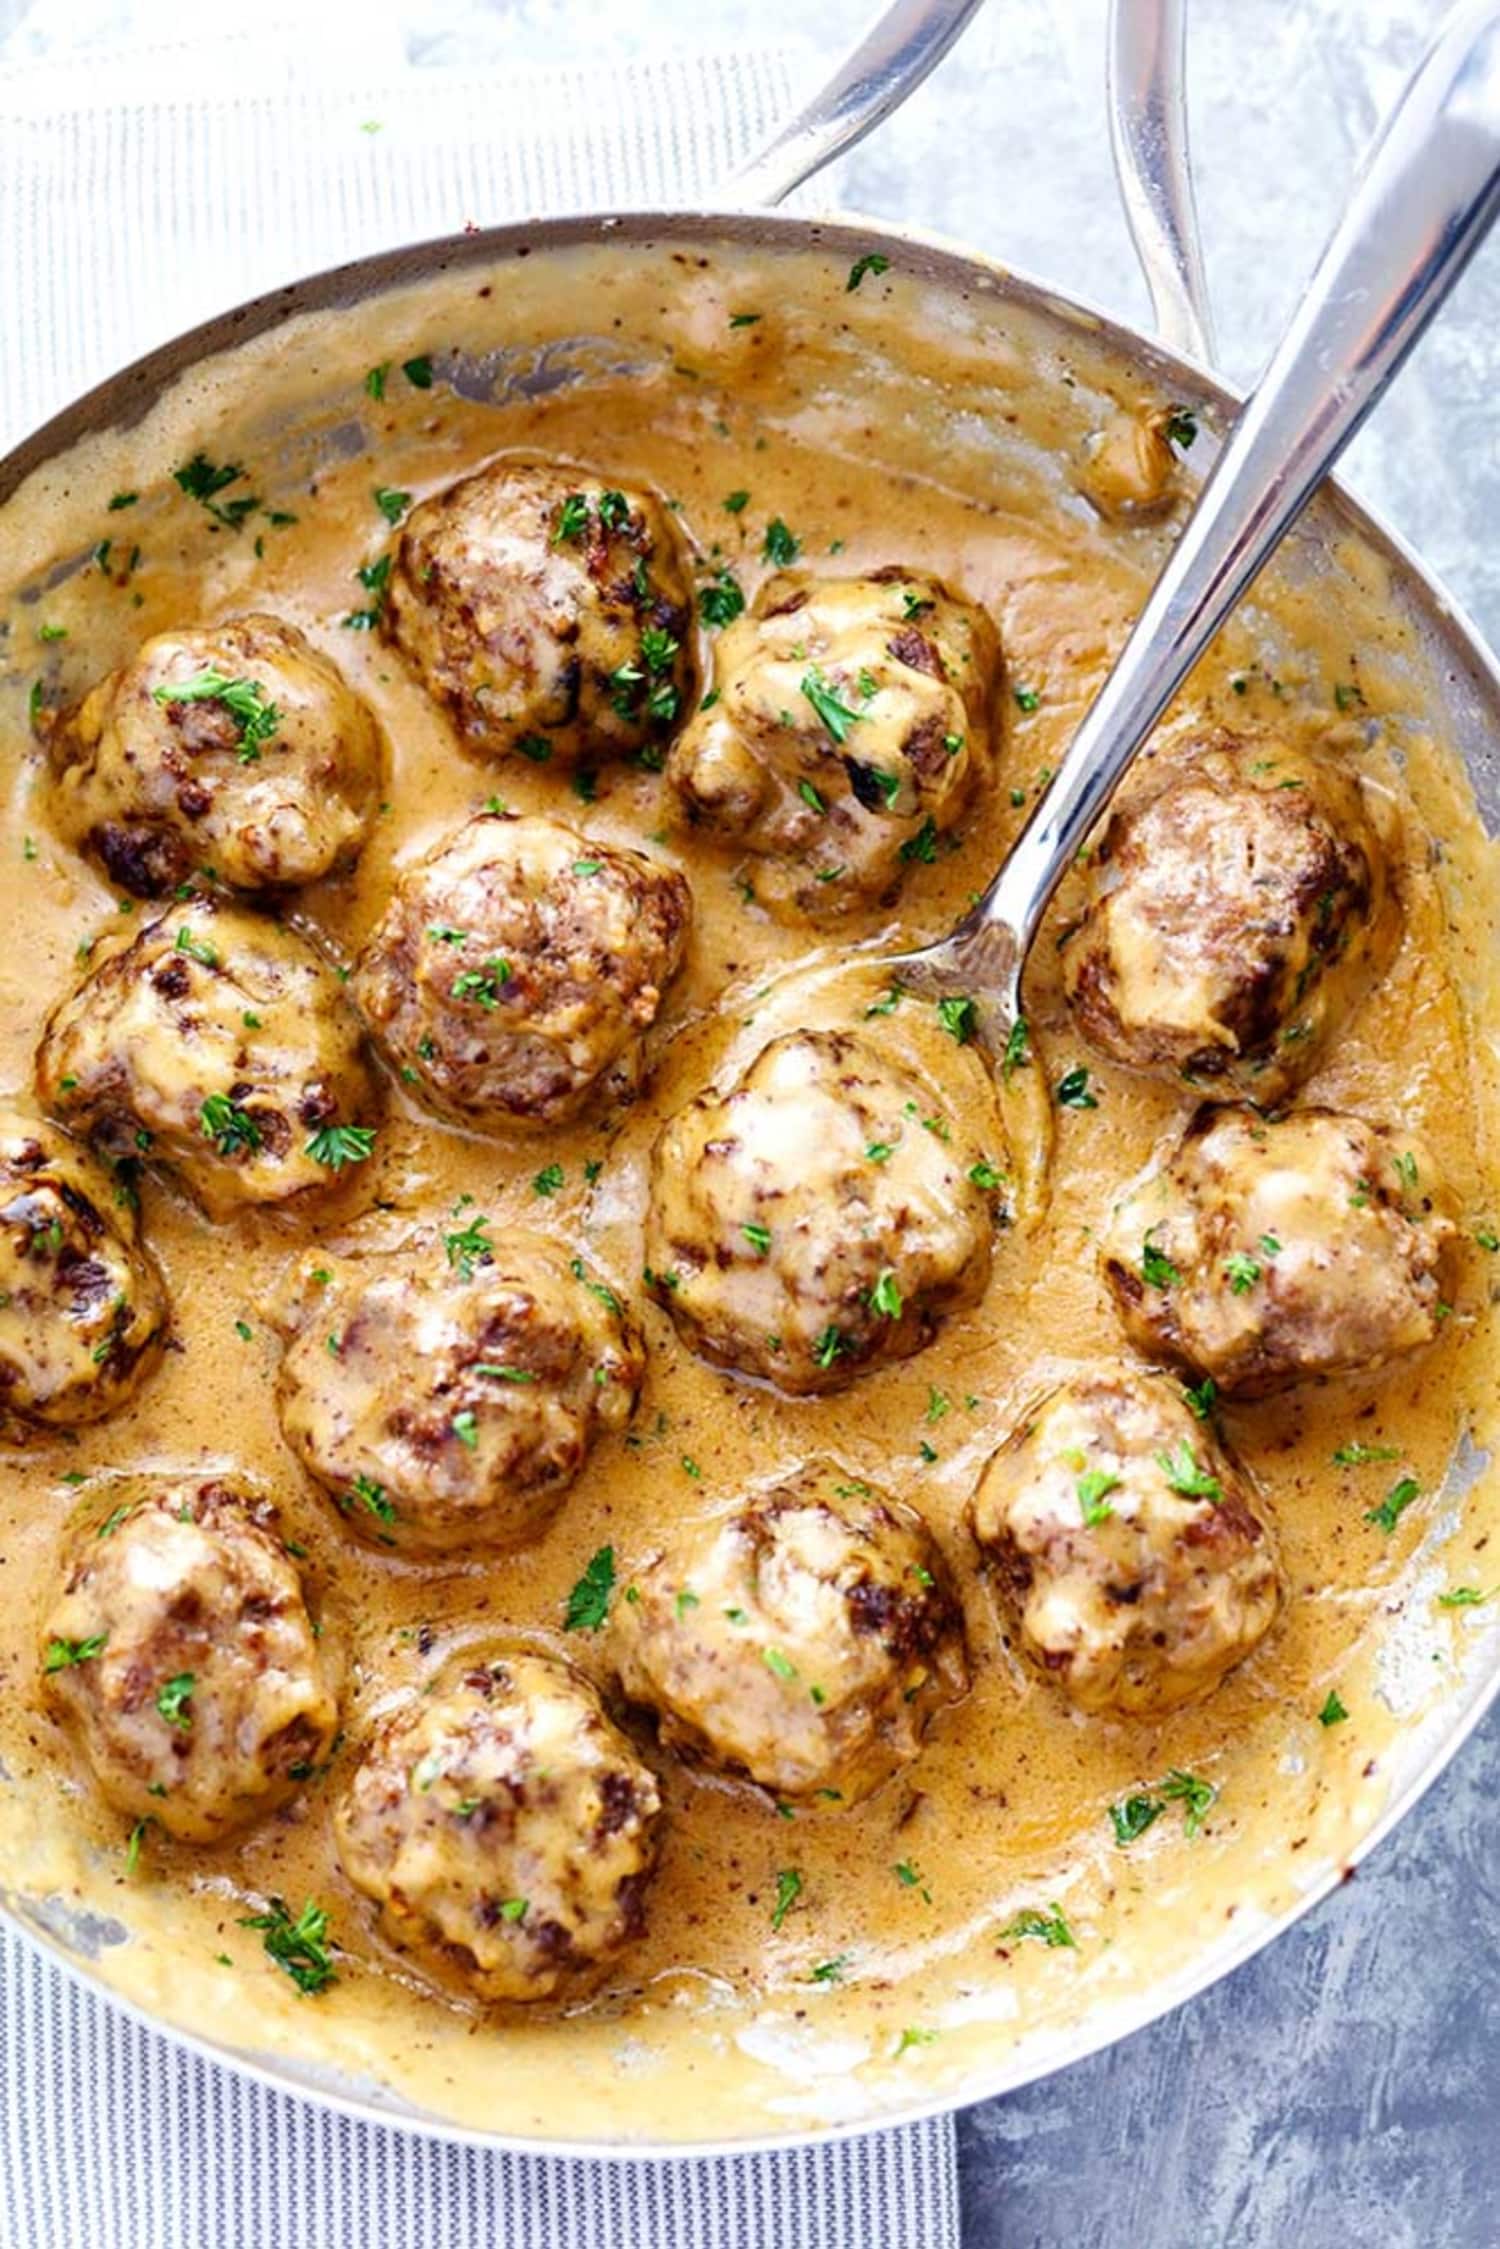 You Don’t Have to Go to IKEA for the Best Swedish Meatballs | Kitchn